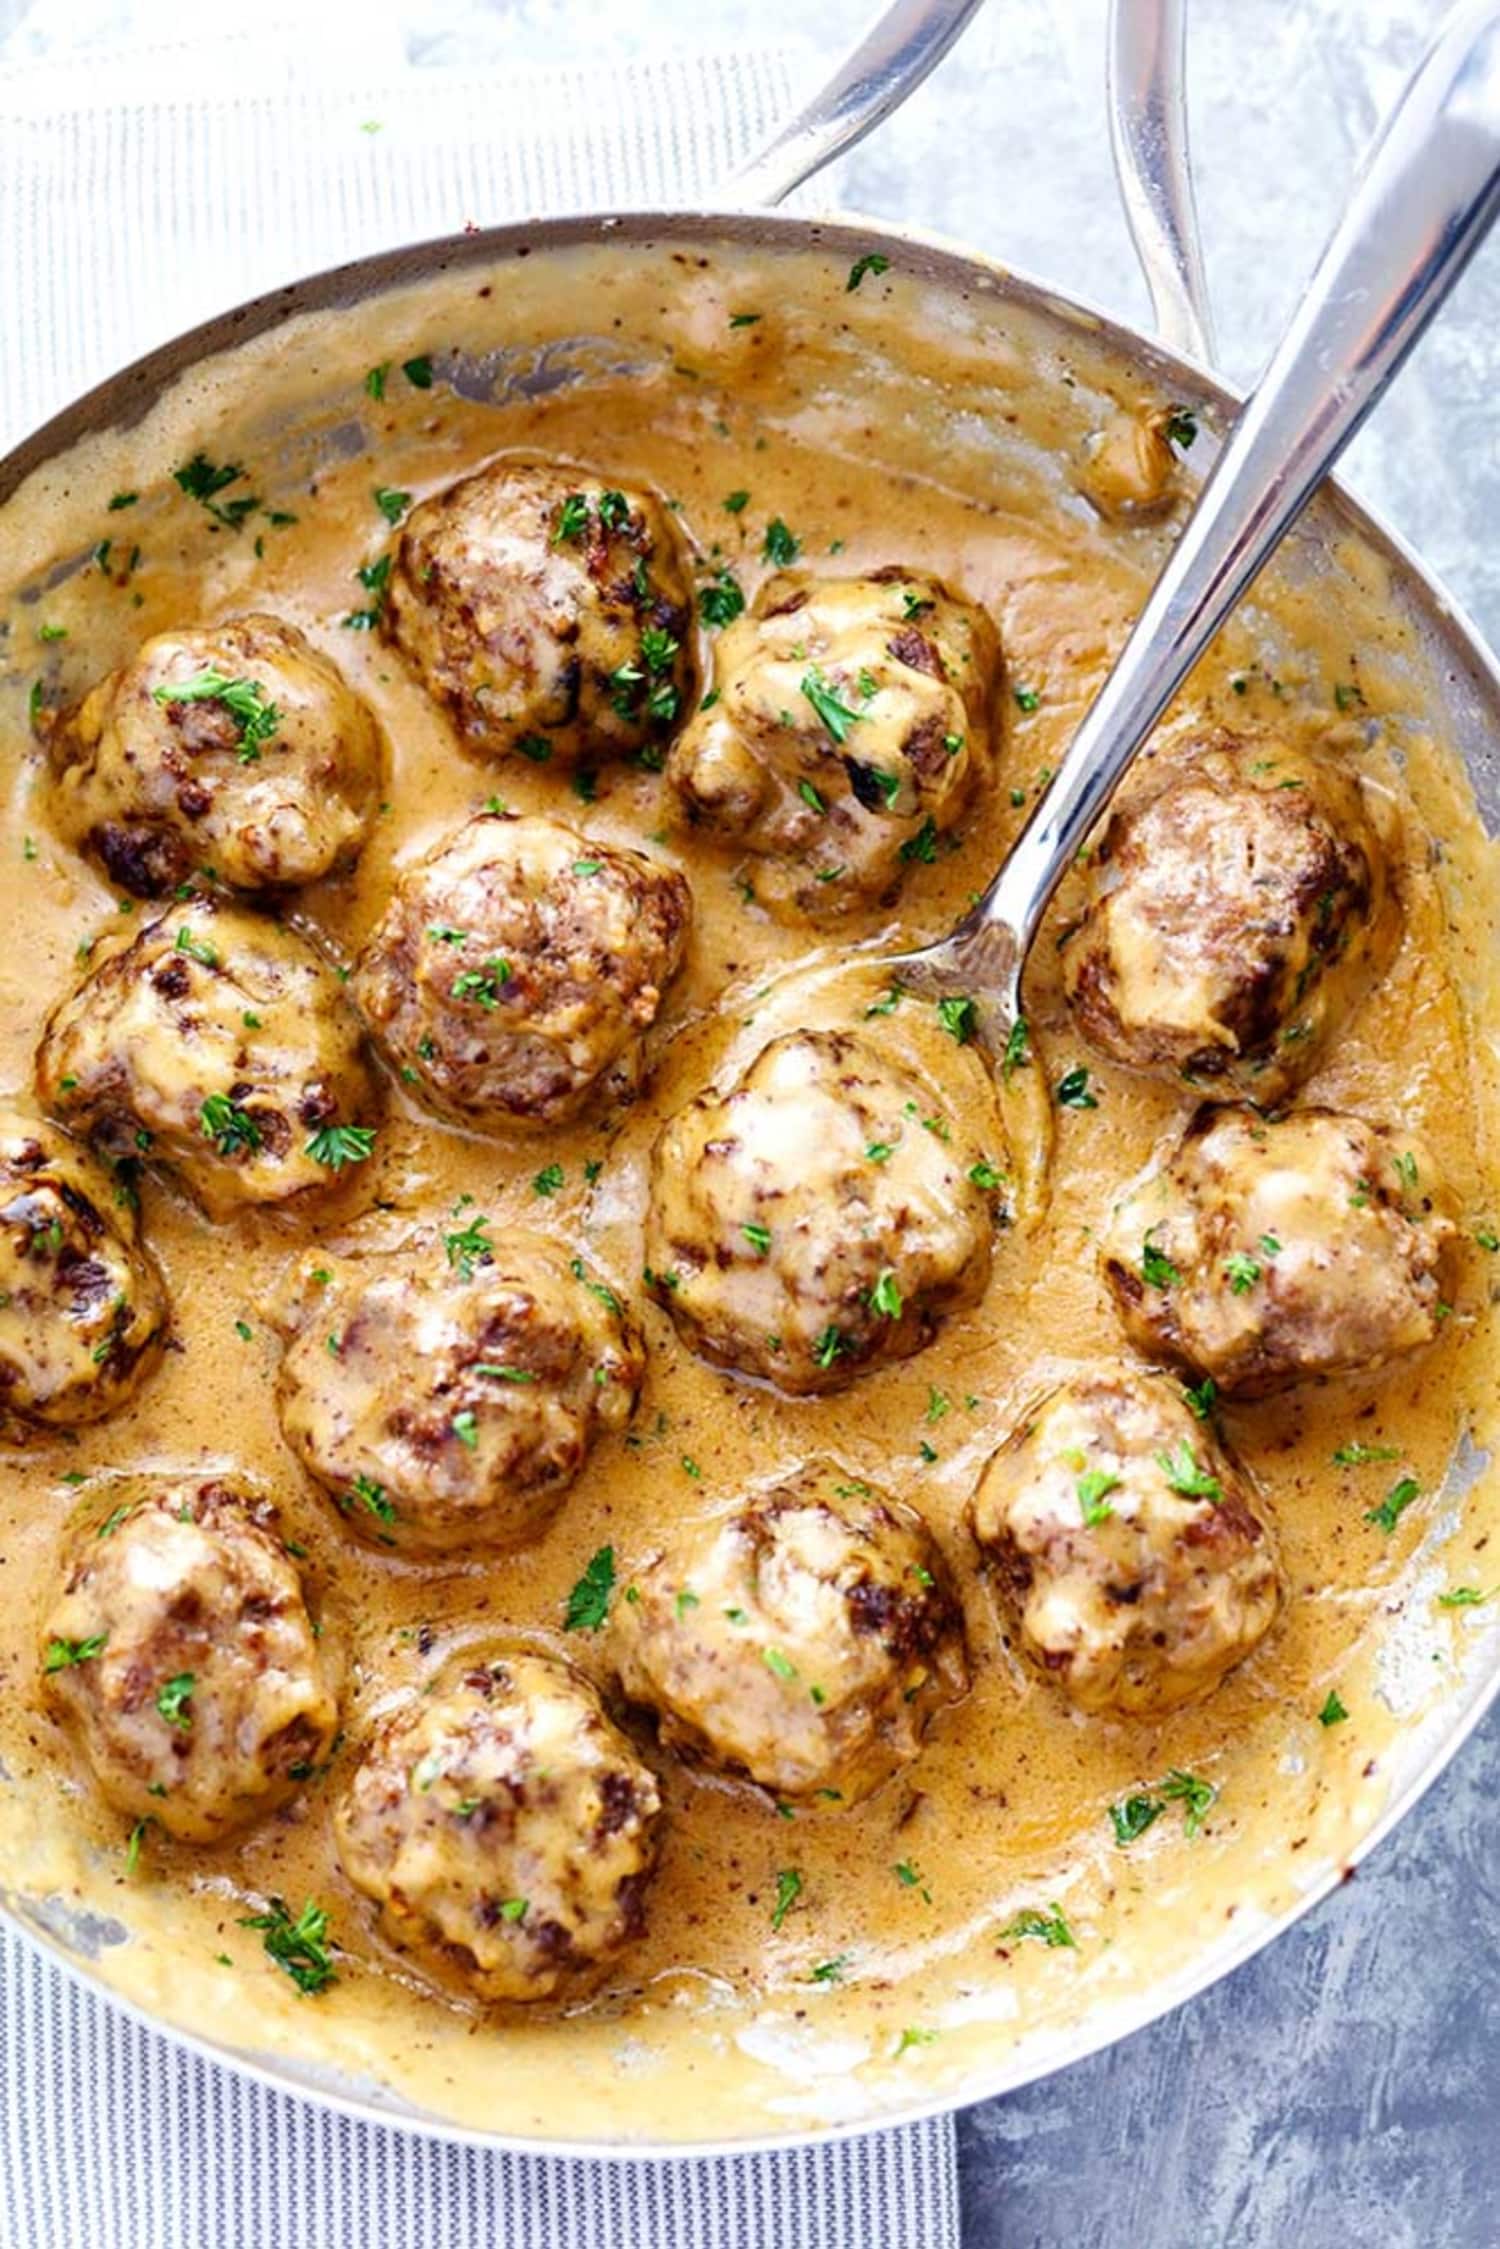 You Don’t Have to Go to IKEA for the Best Swedish Meatballs | Kitchn